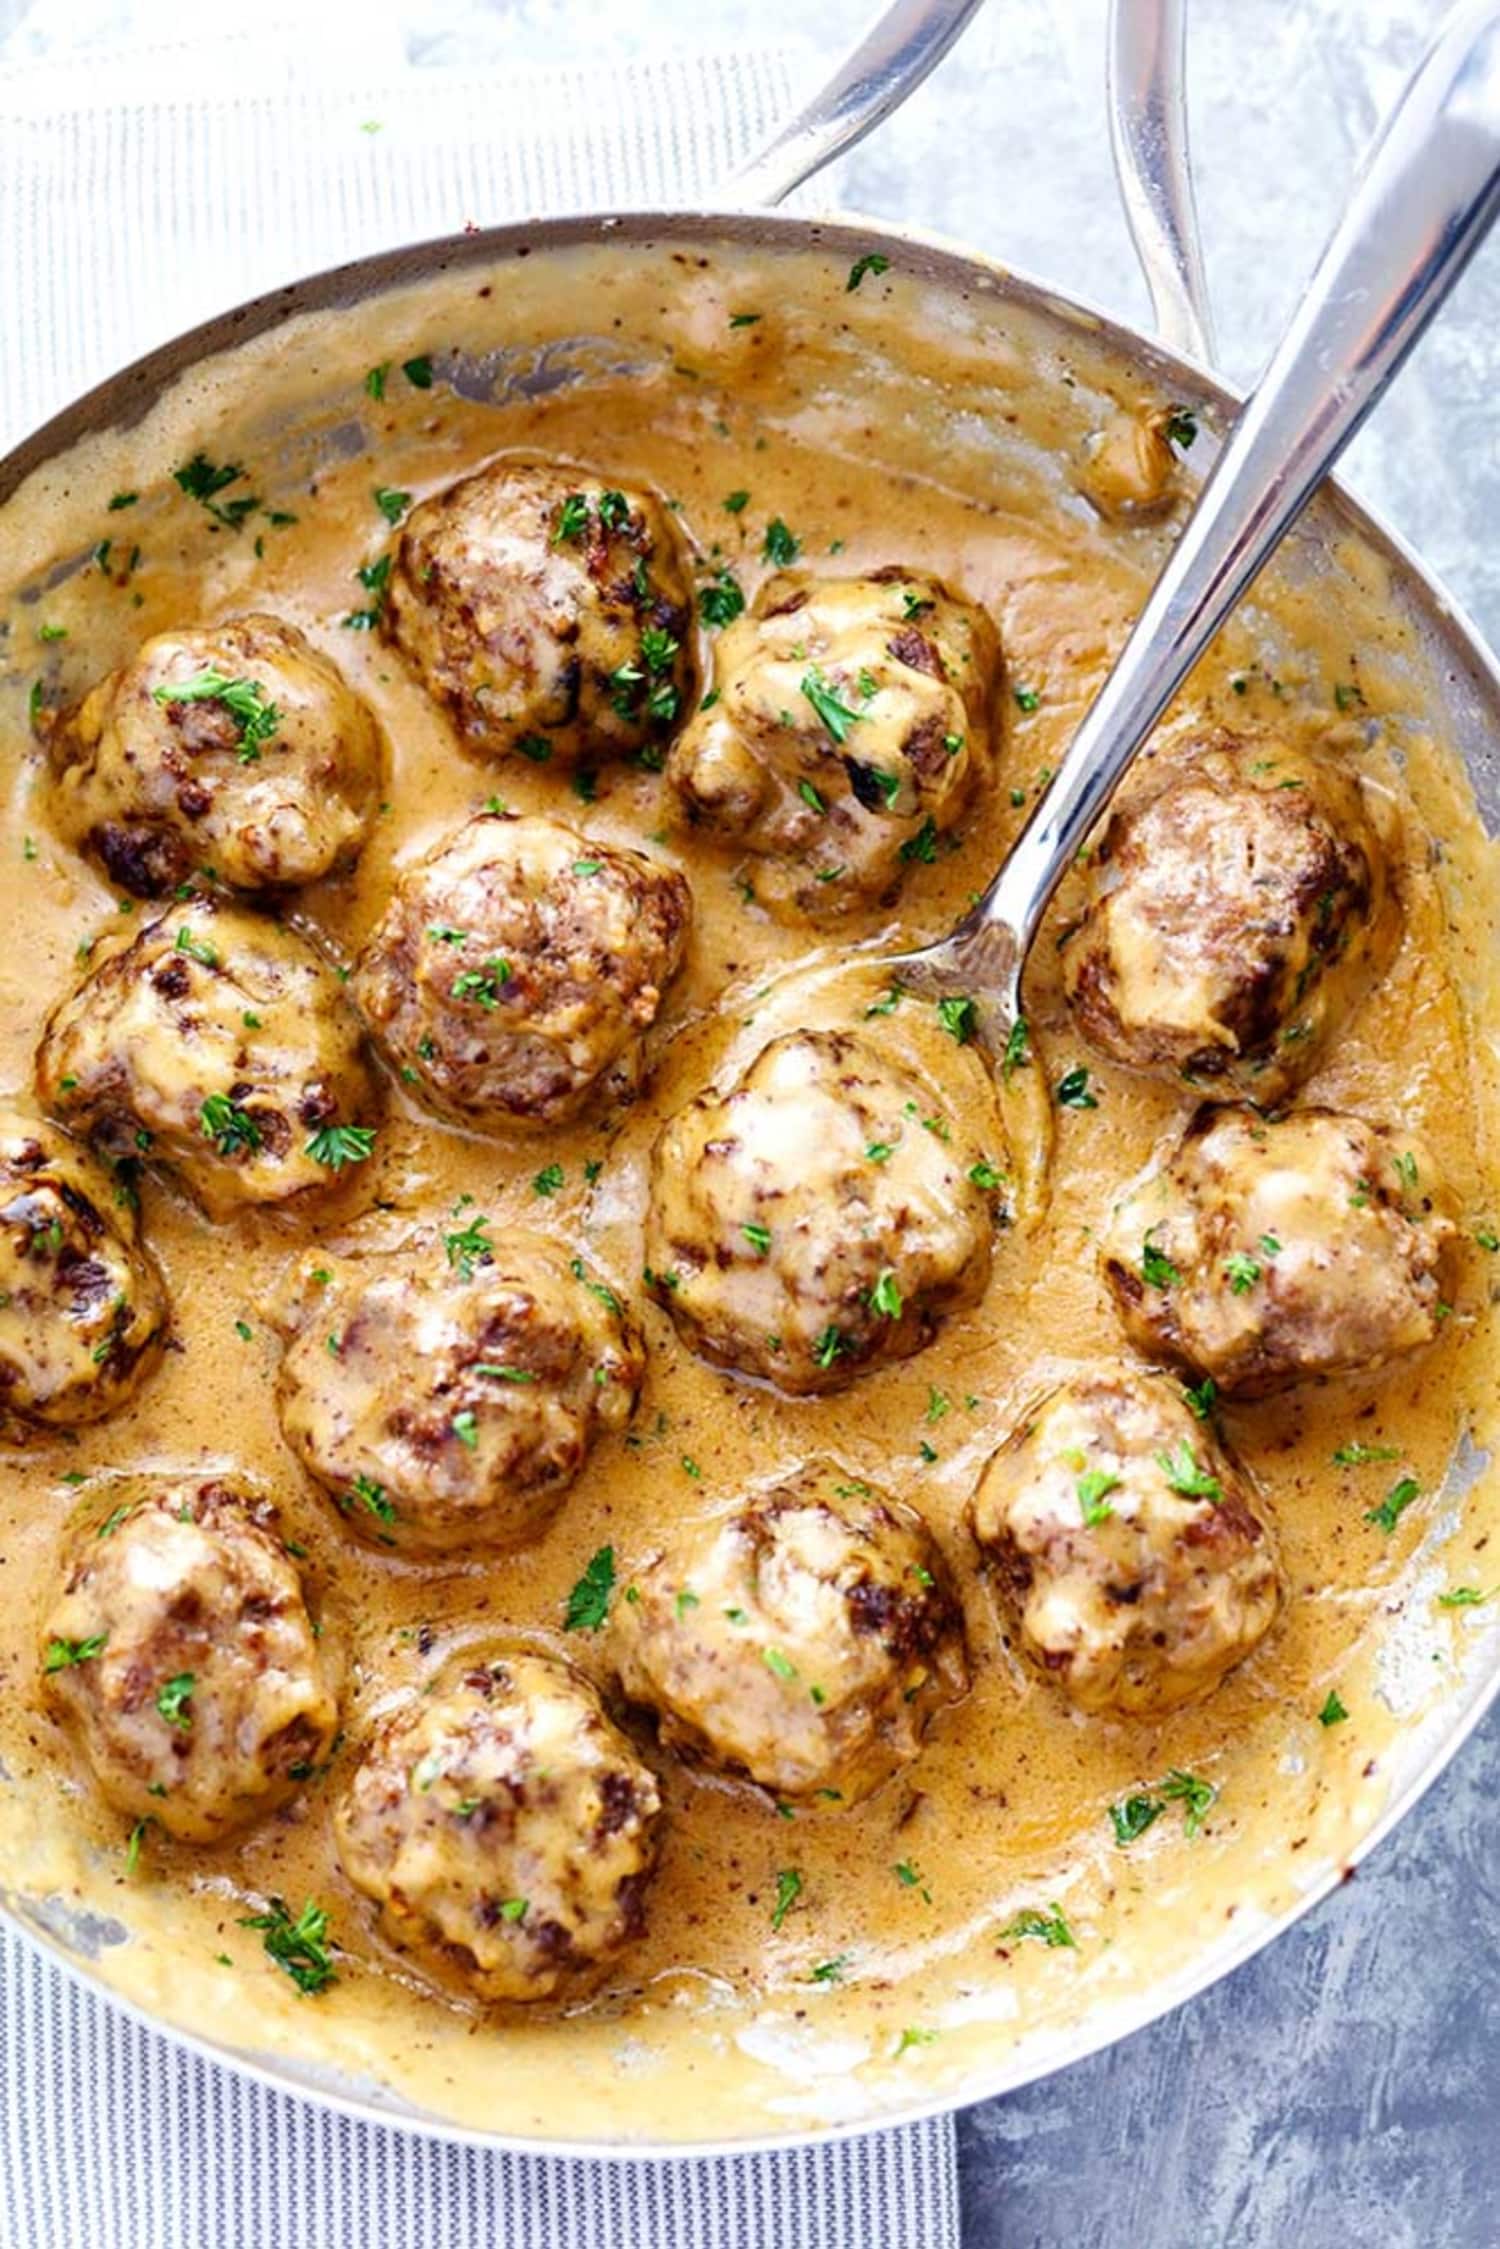 You Don’t Have to Go to IKEA for the Best Swedish Meatballs | Kitchn